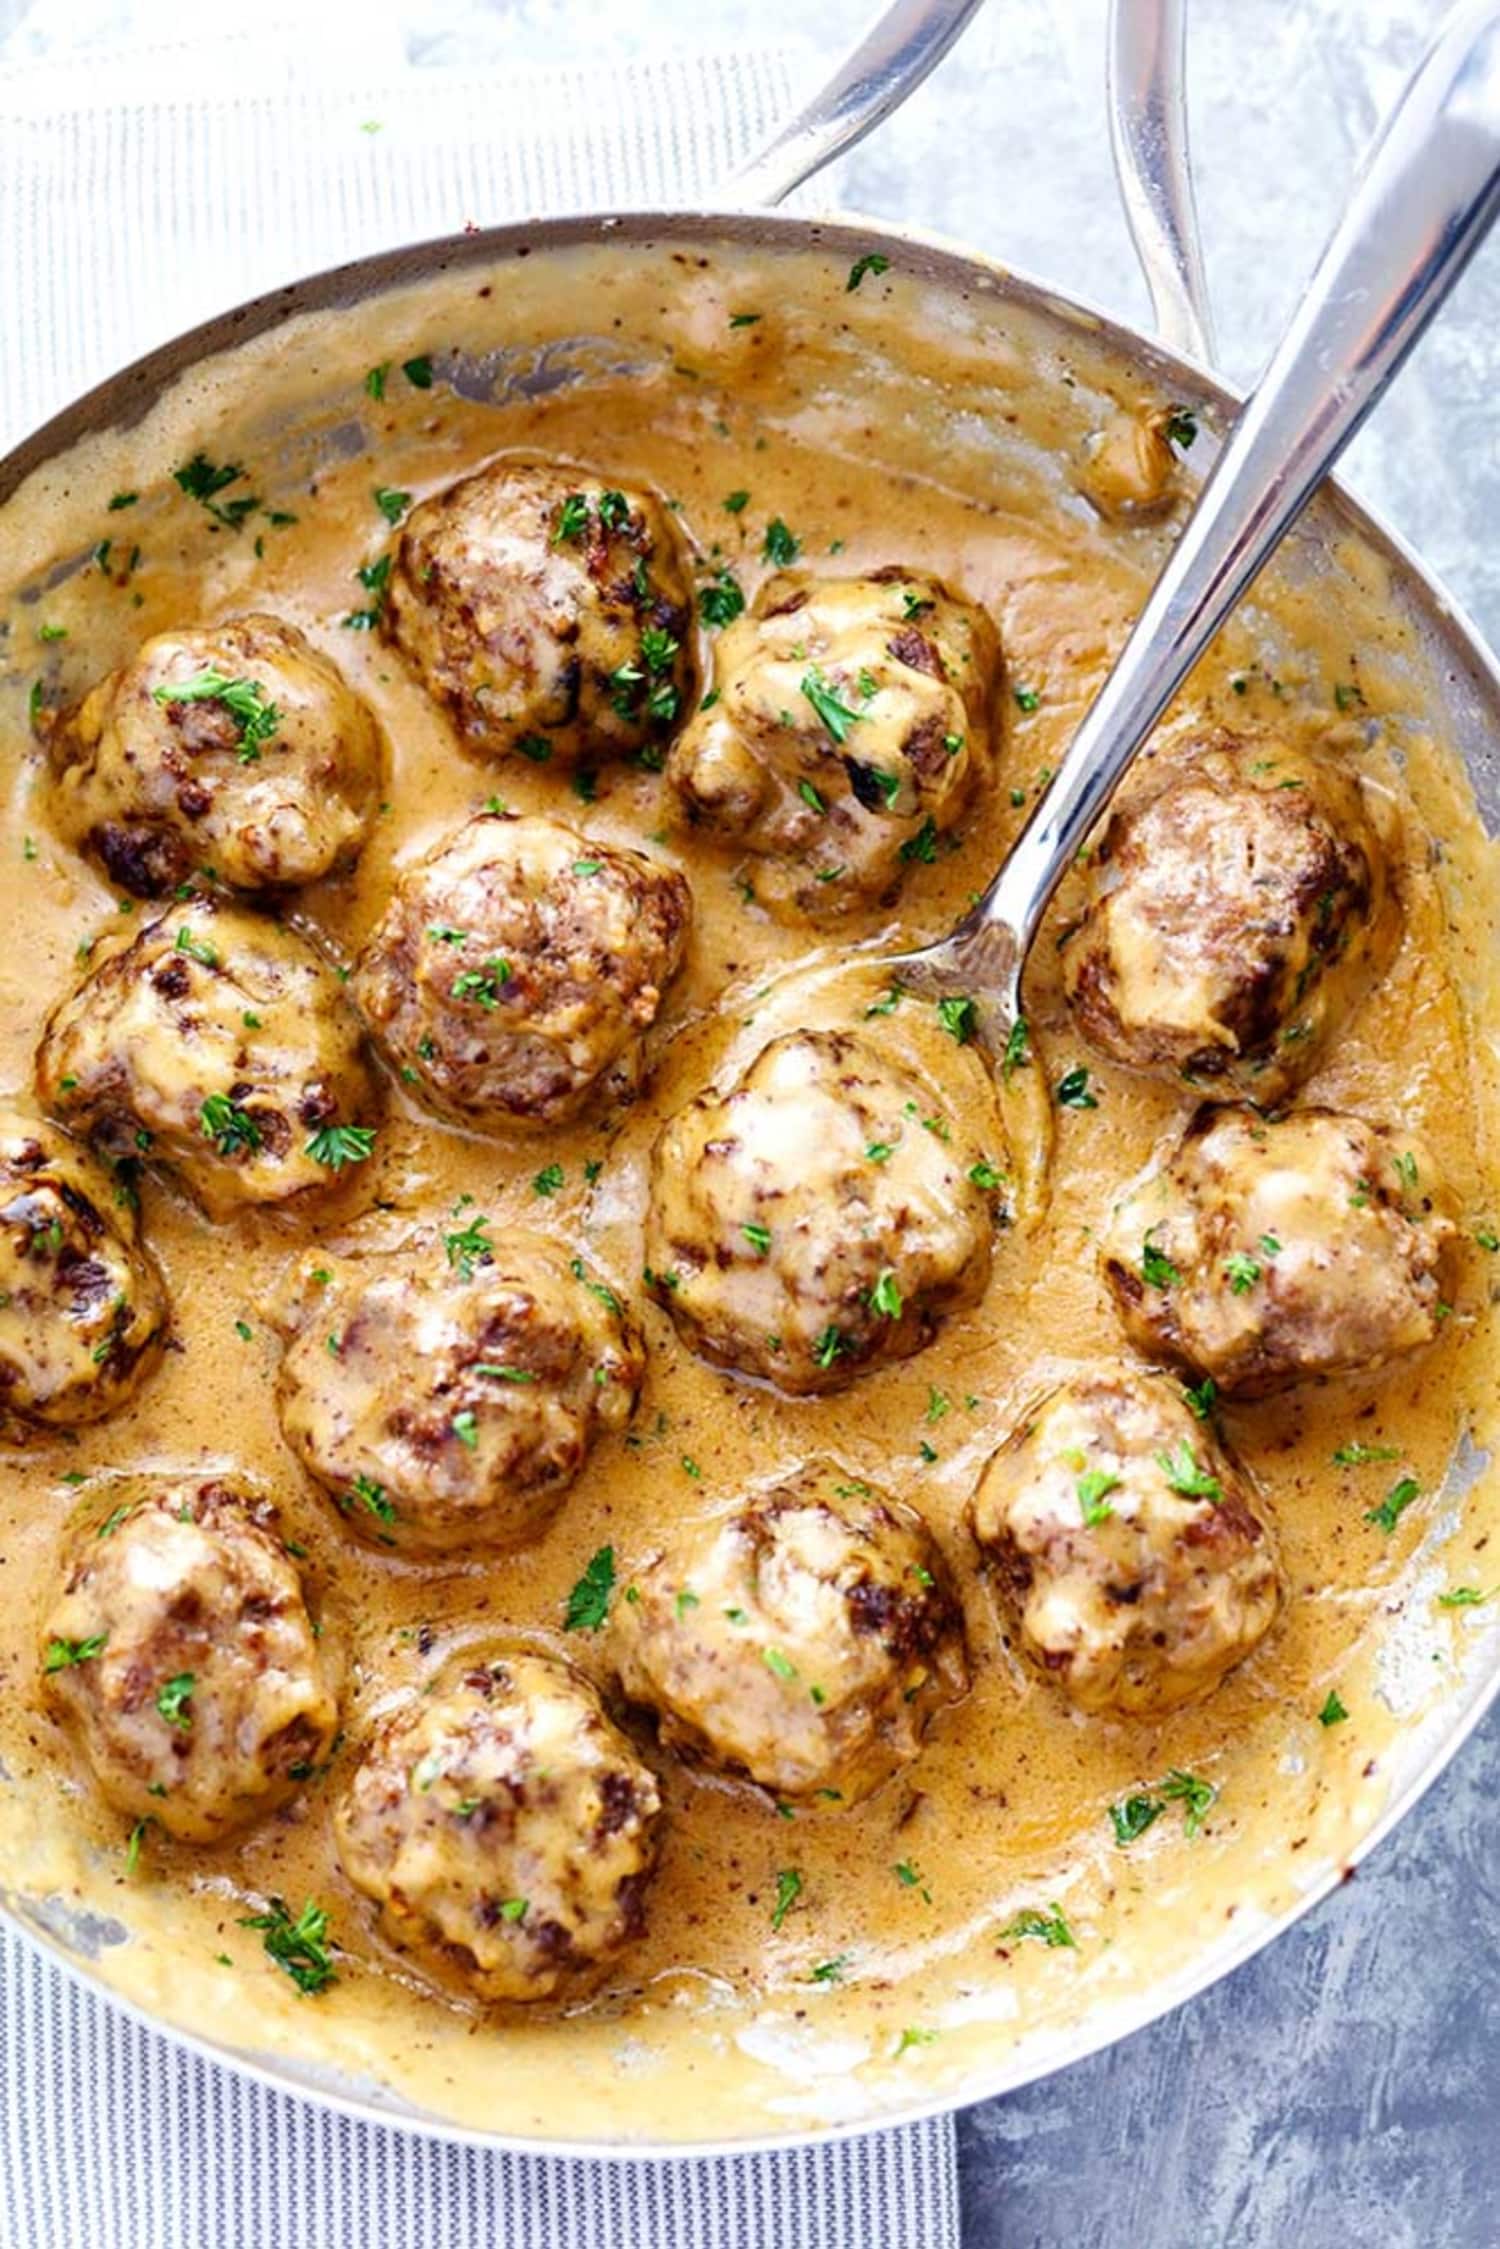 You Don’t Have to Go to IKEA for the Best Swedish Meatballs | Kitchn